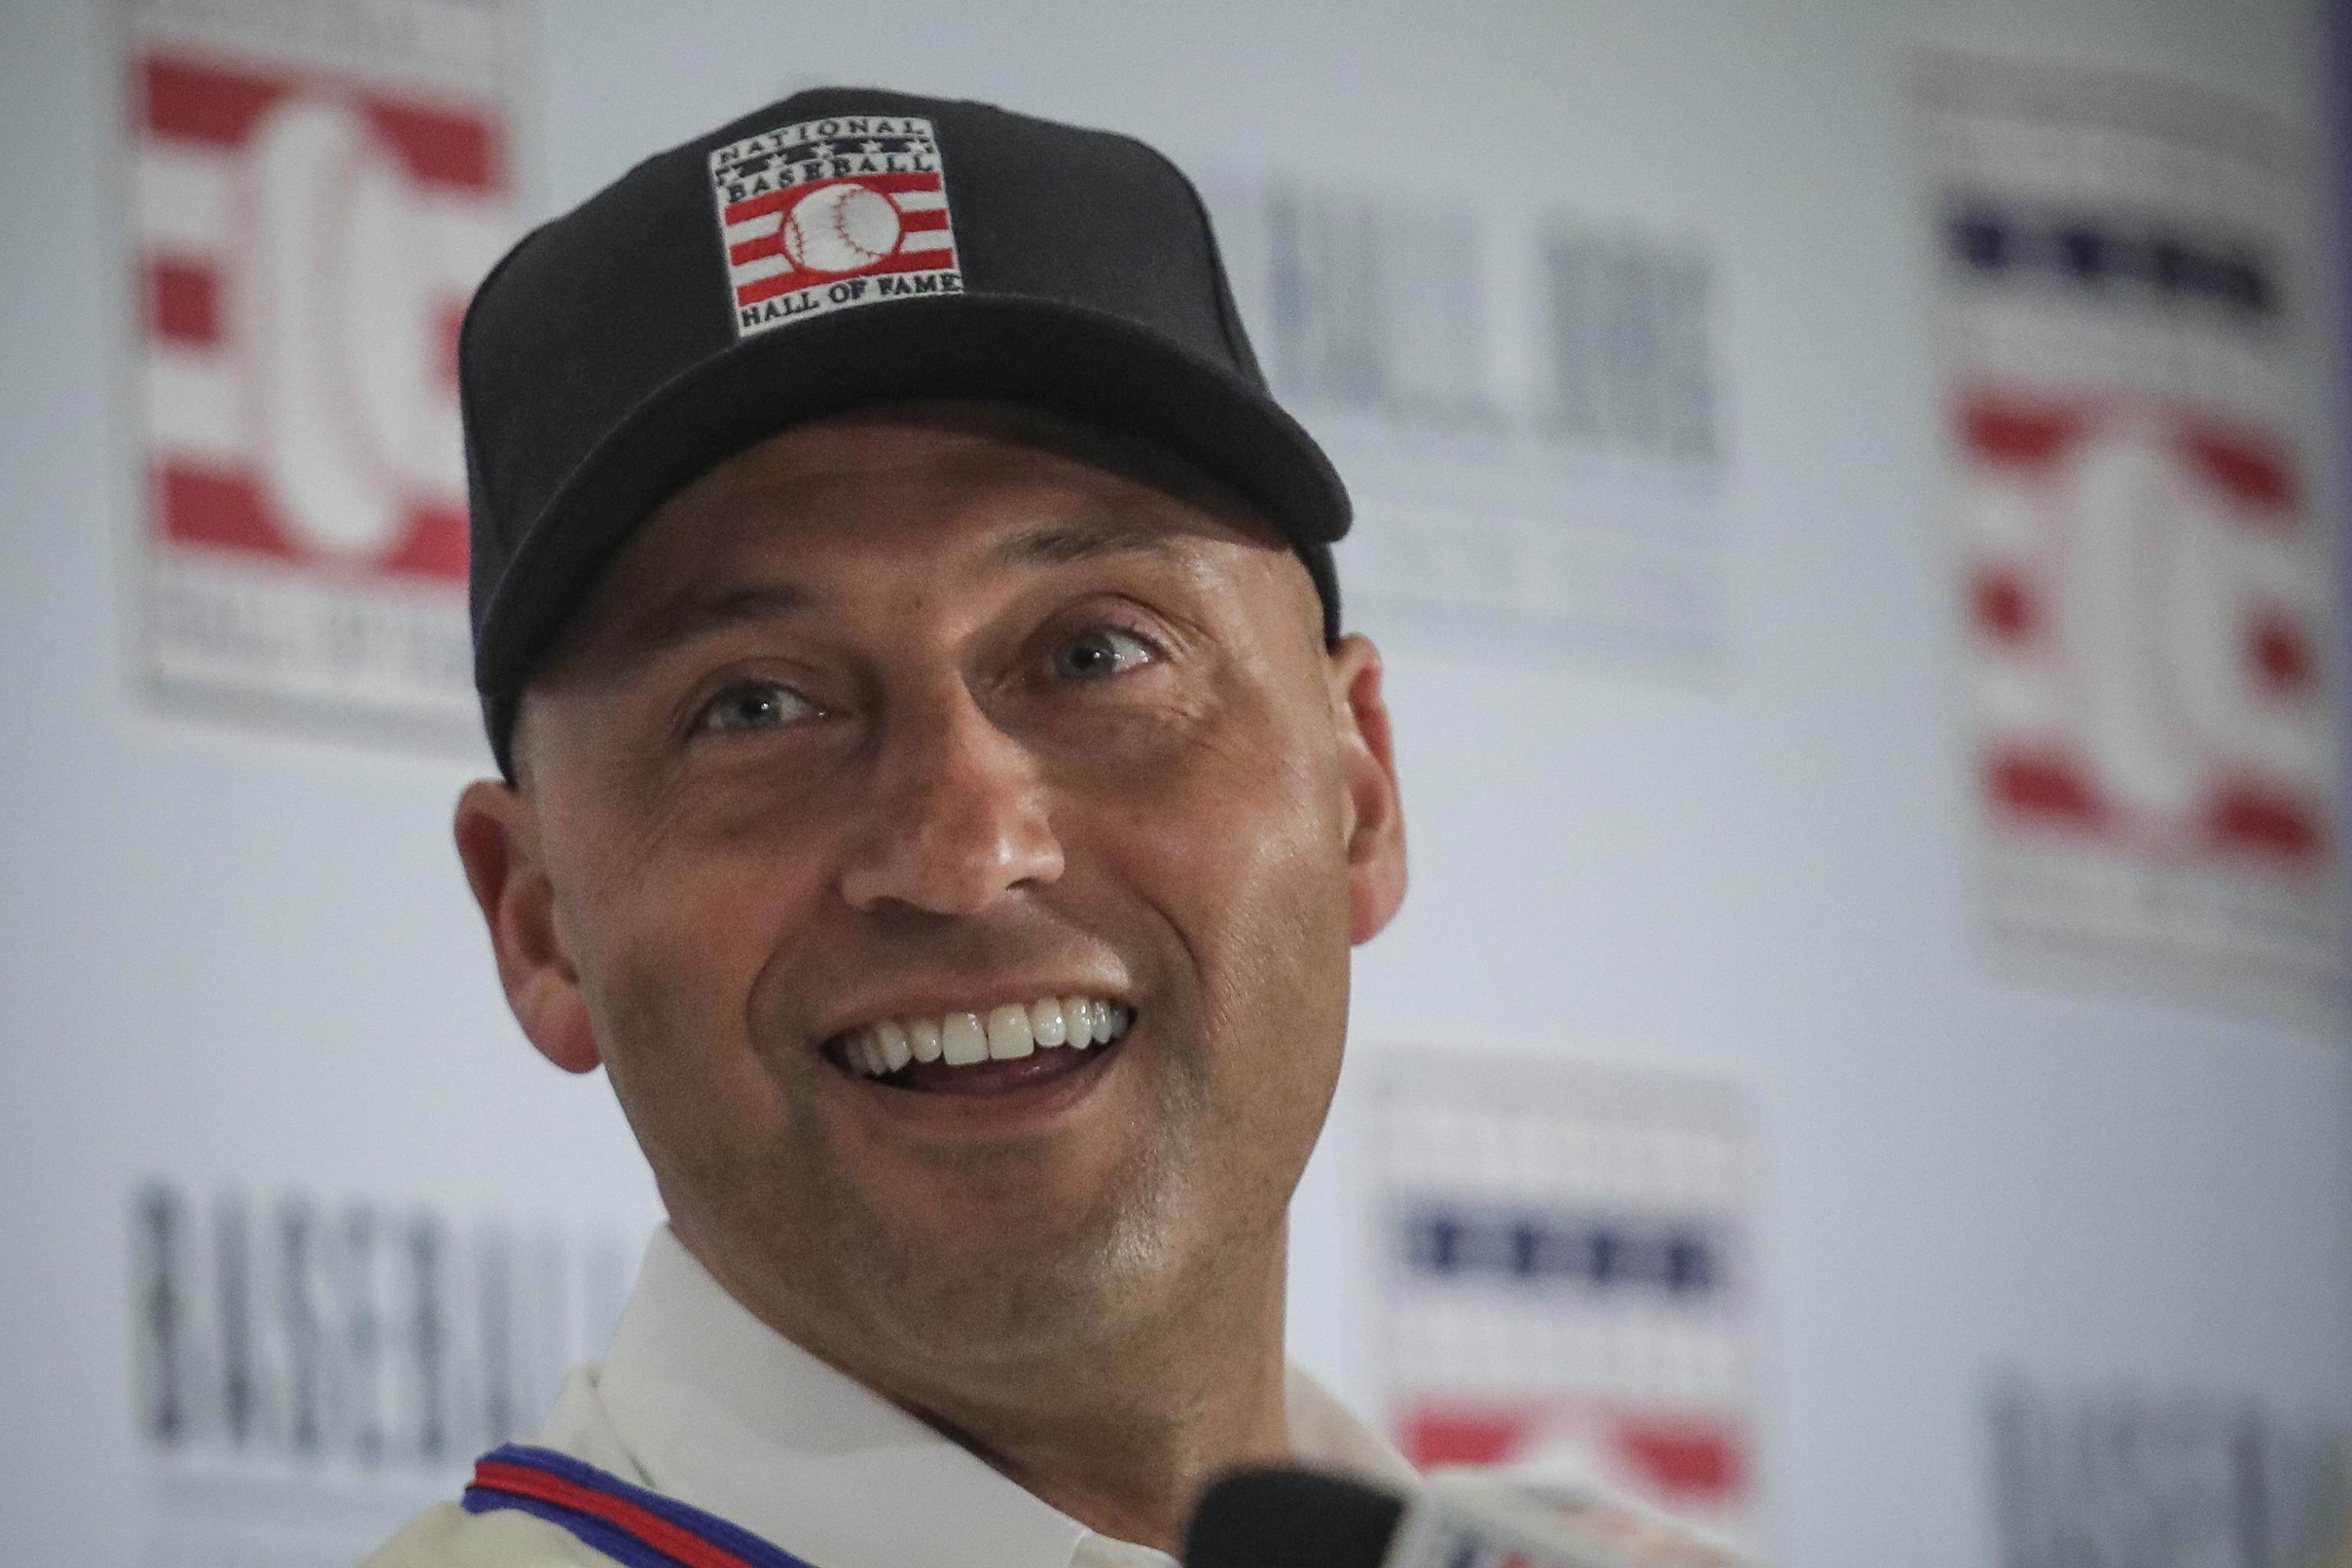 Derek Jeter Hall of Fame non-voter needs to stand up - Chicago Sun